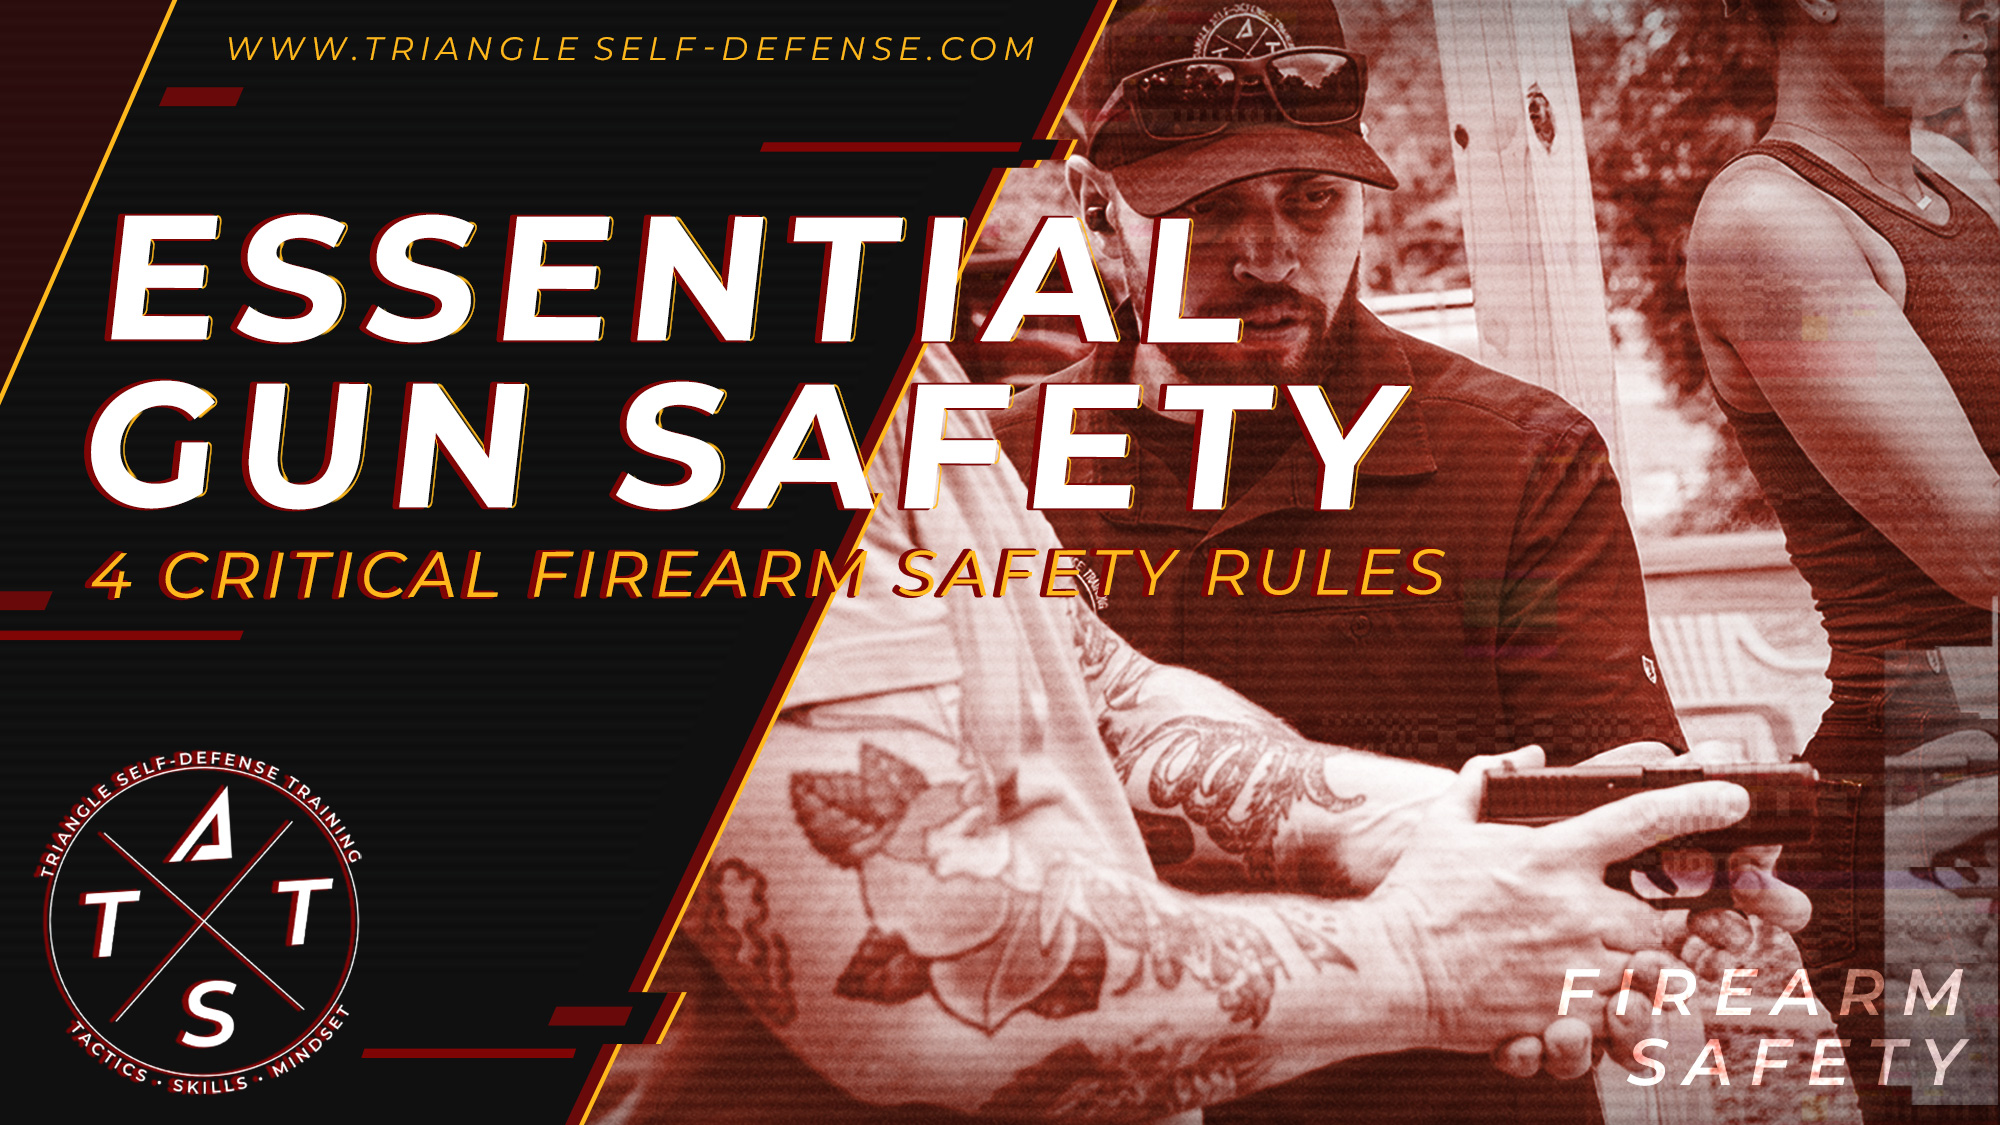 Firearms instructor teaching the firearm safety rules to new students